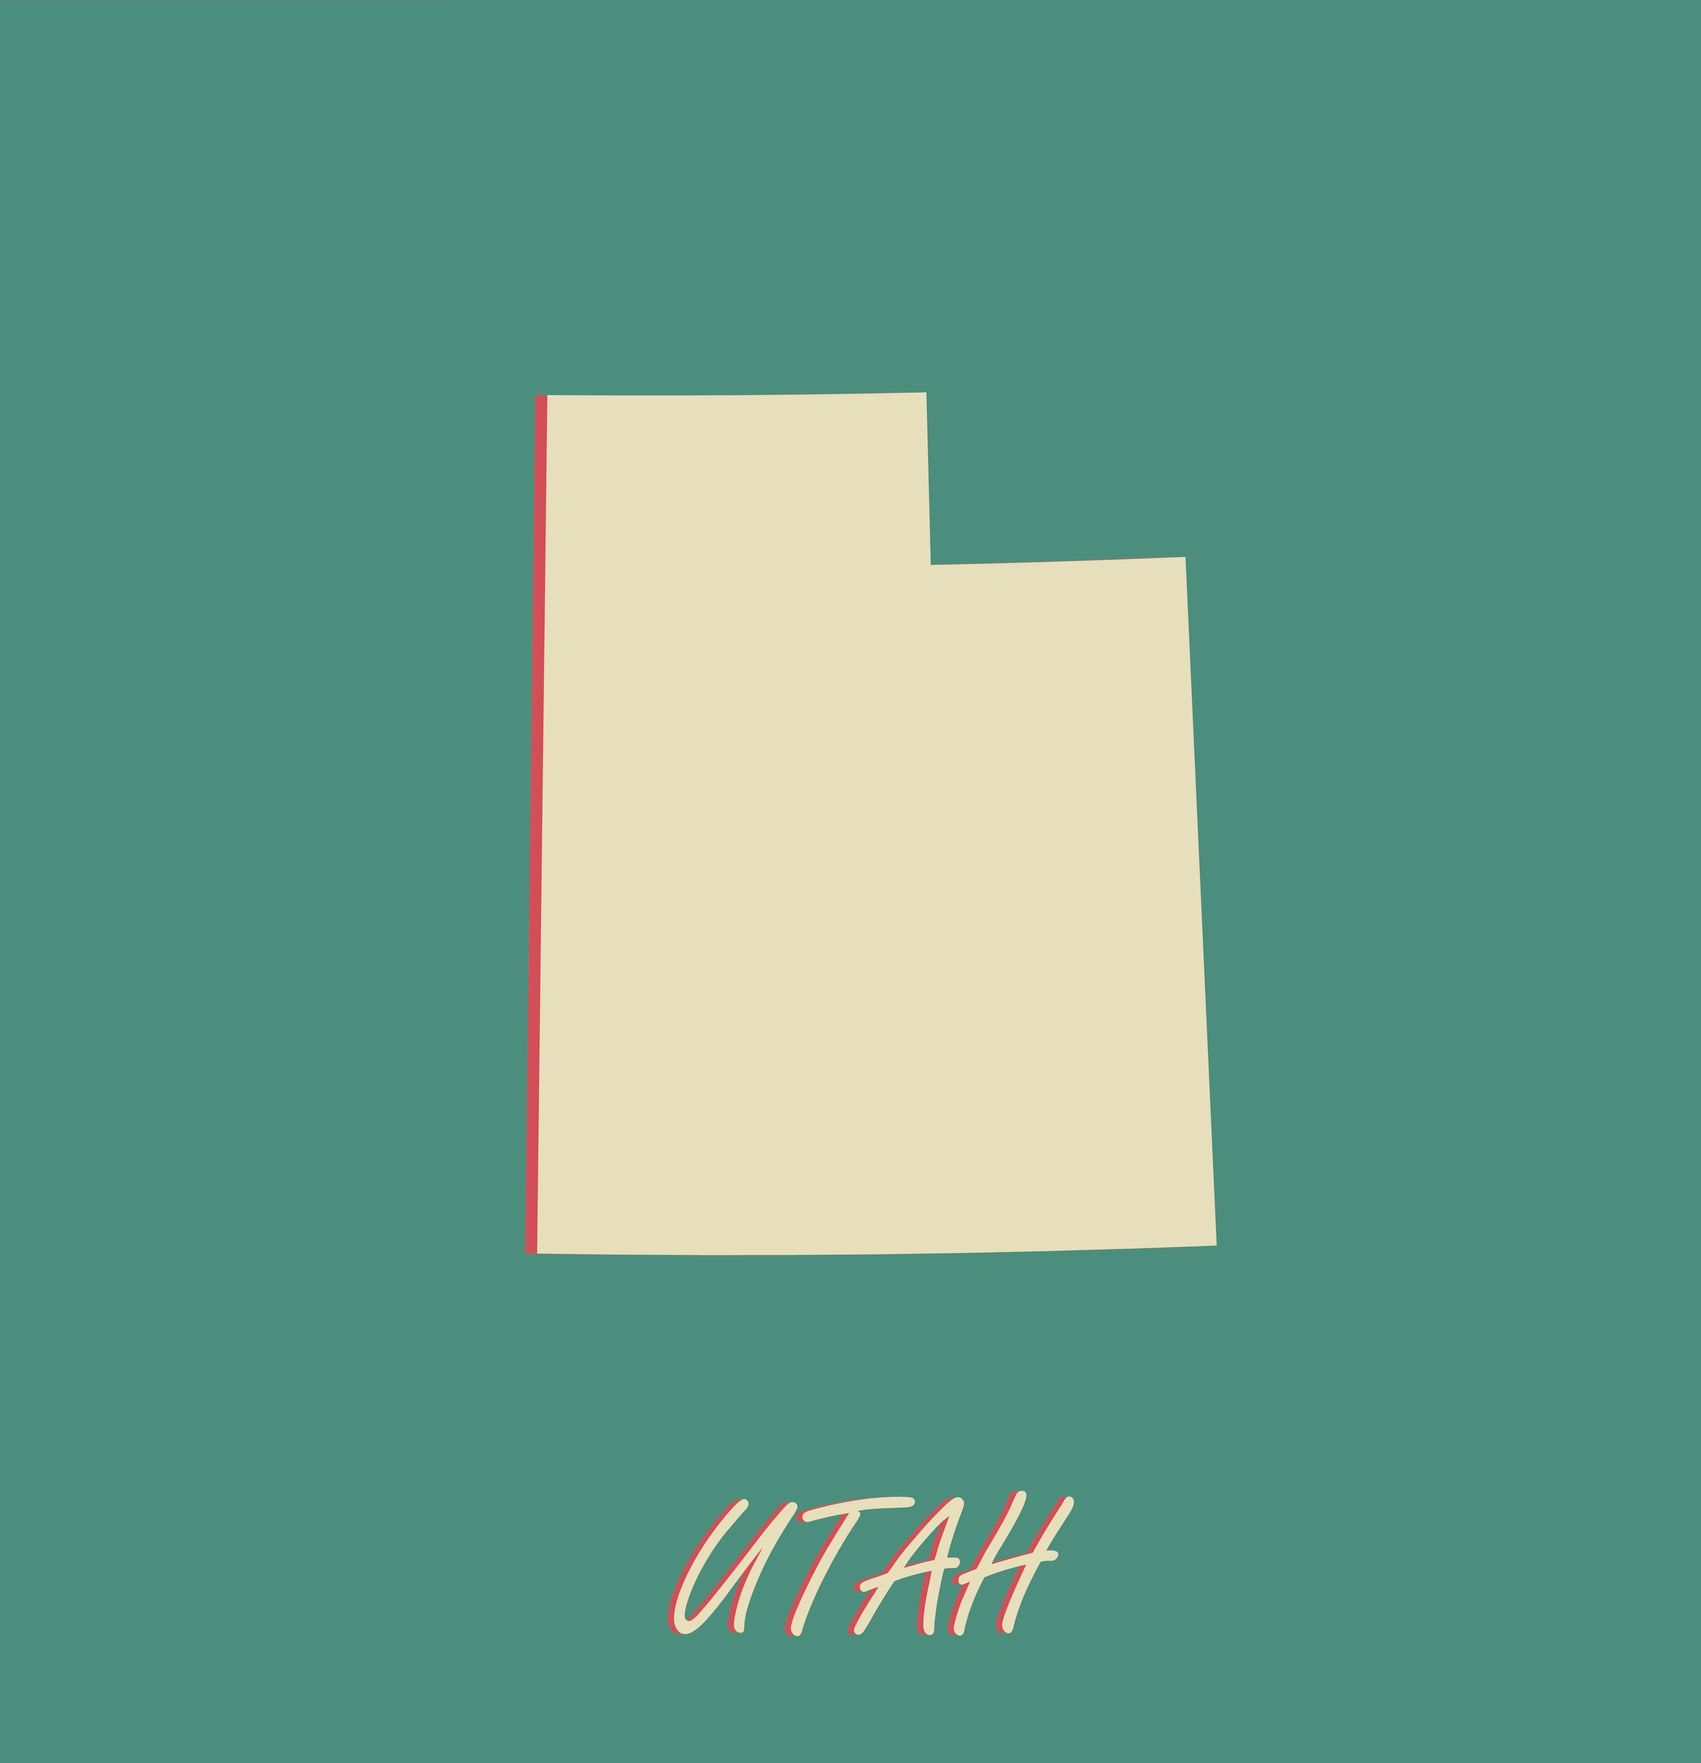 Utah household employment tax and labor law guide